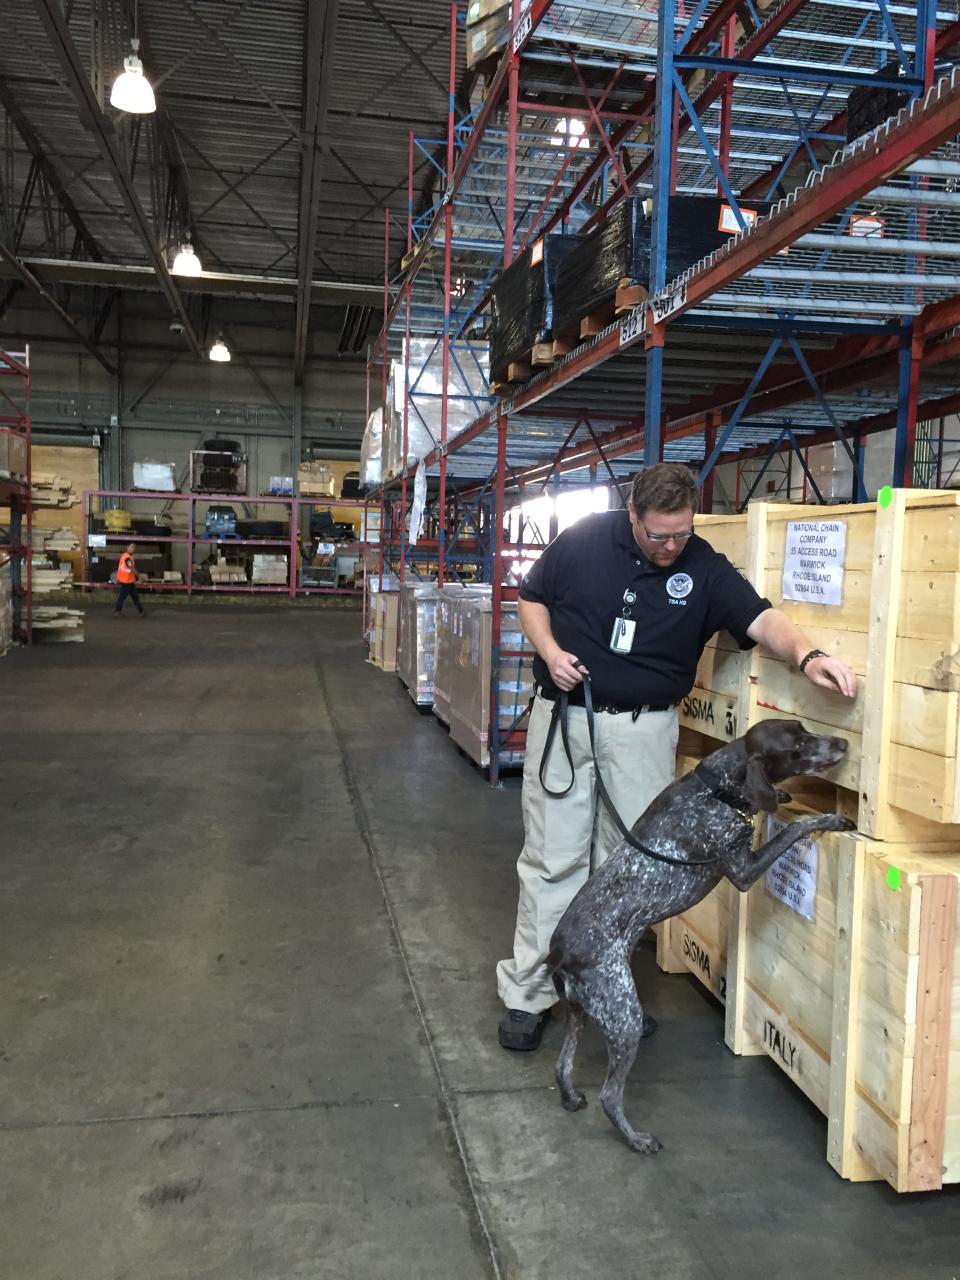 Francis "Frank" Boccabella III and his previous canine partner, Zmay, are seen inspecting cargo for explosives in 2015.